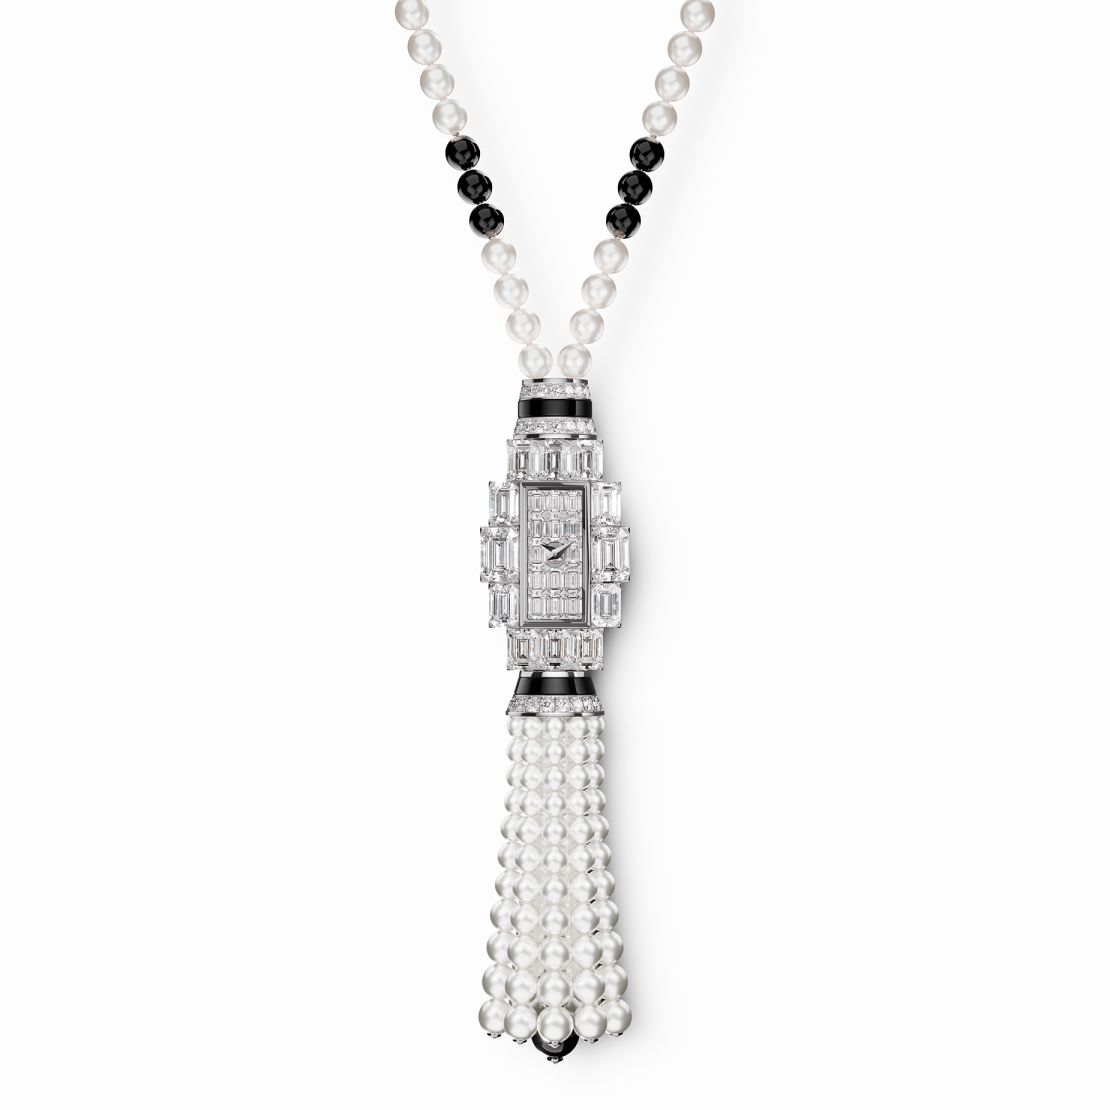 Vacheron Constantin Grand Lady Kalla High Jewelry watch in 18K white gold, emerald-cut diamonds, Akoya pearl beads, onyx beads, POA, <a href="http://www.vacheron-constantin.com/" target="_blank">vacheron-constantin.com</a>. Available now.